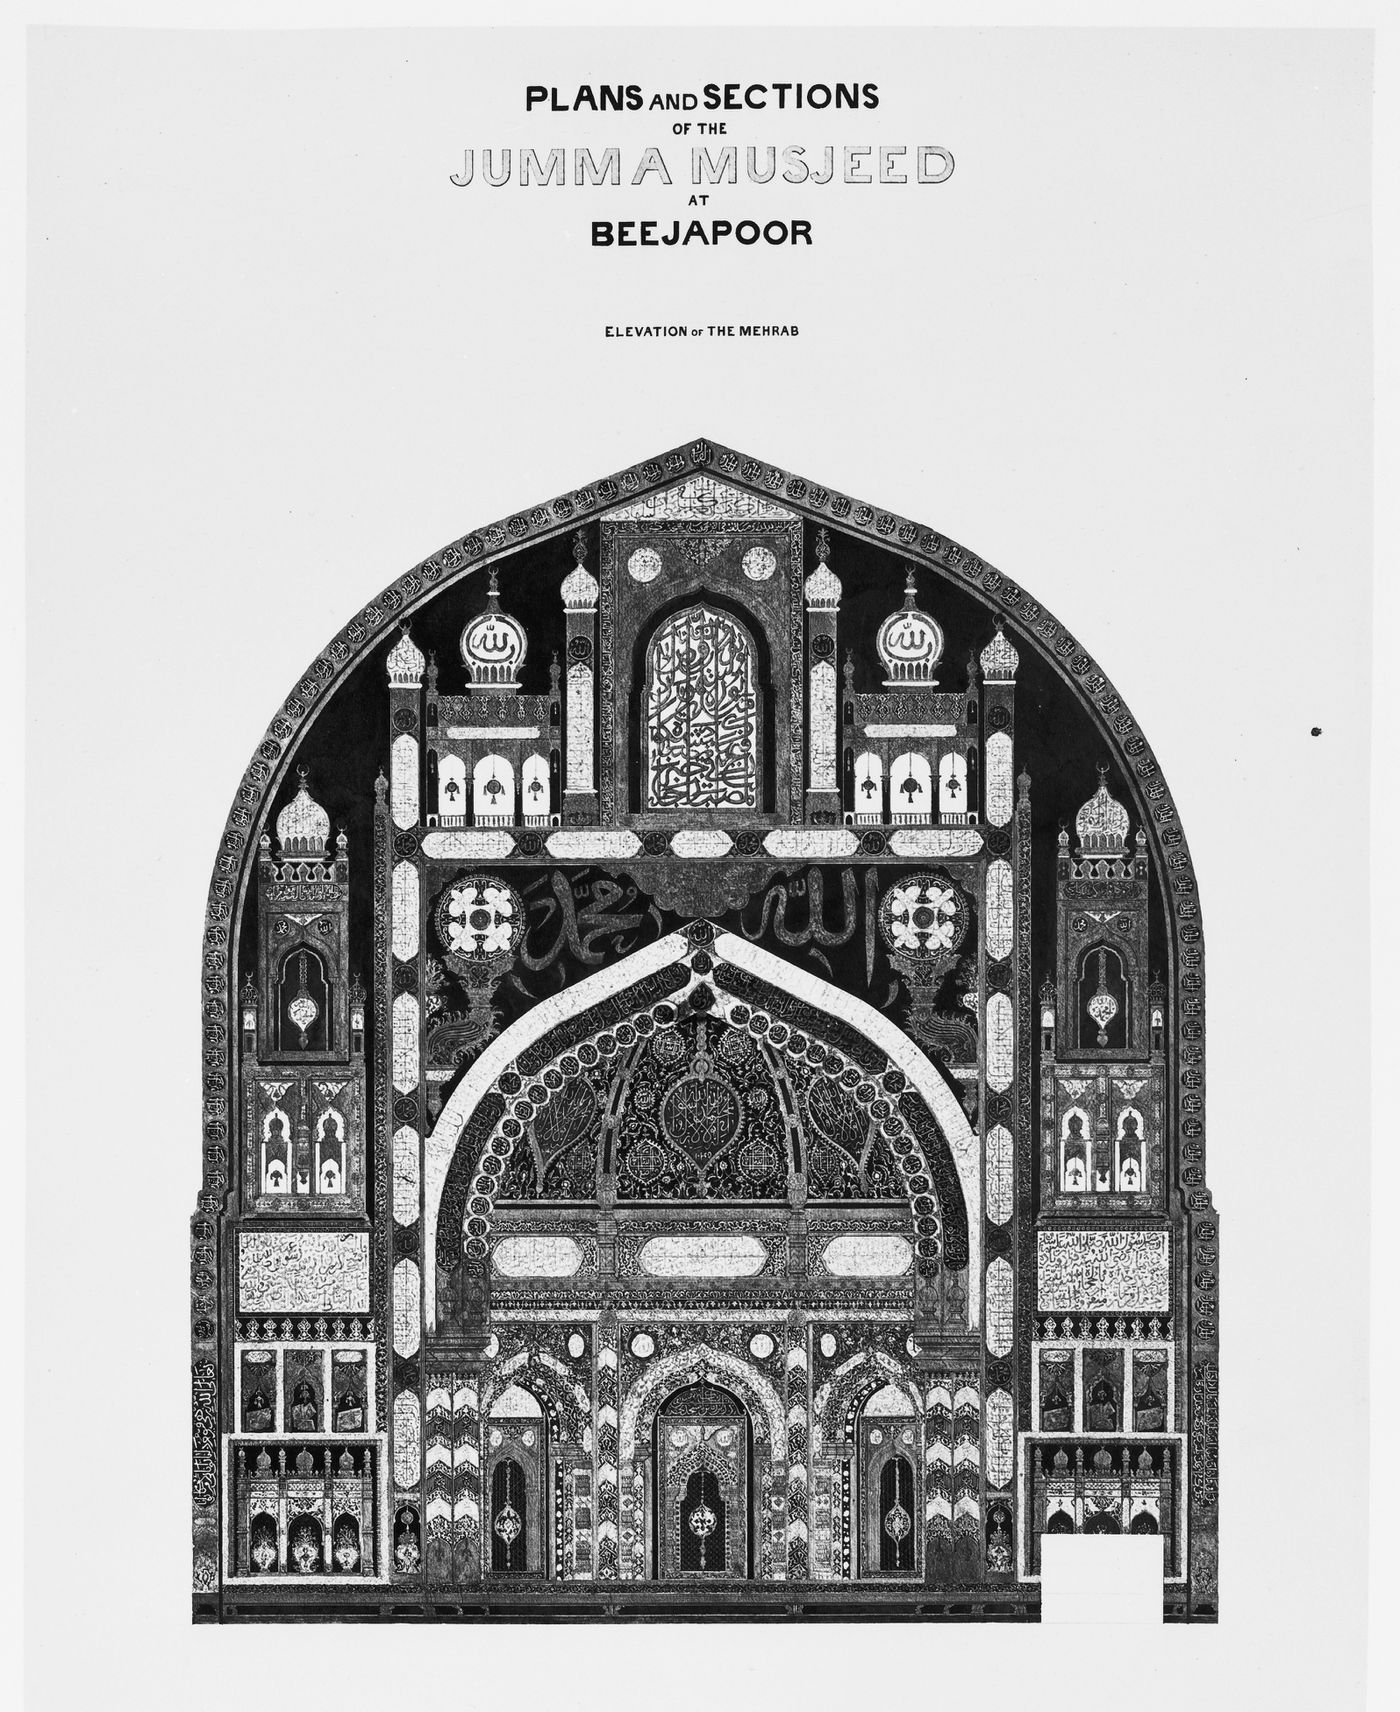 Photograph of an elevation of mihrab of the Jumma Mosque, Beejapore (now Bijapur), India